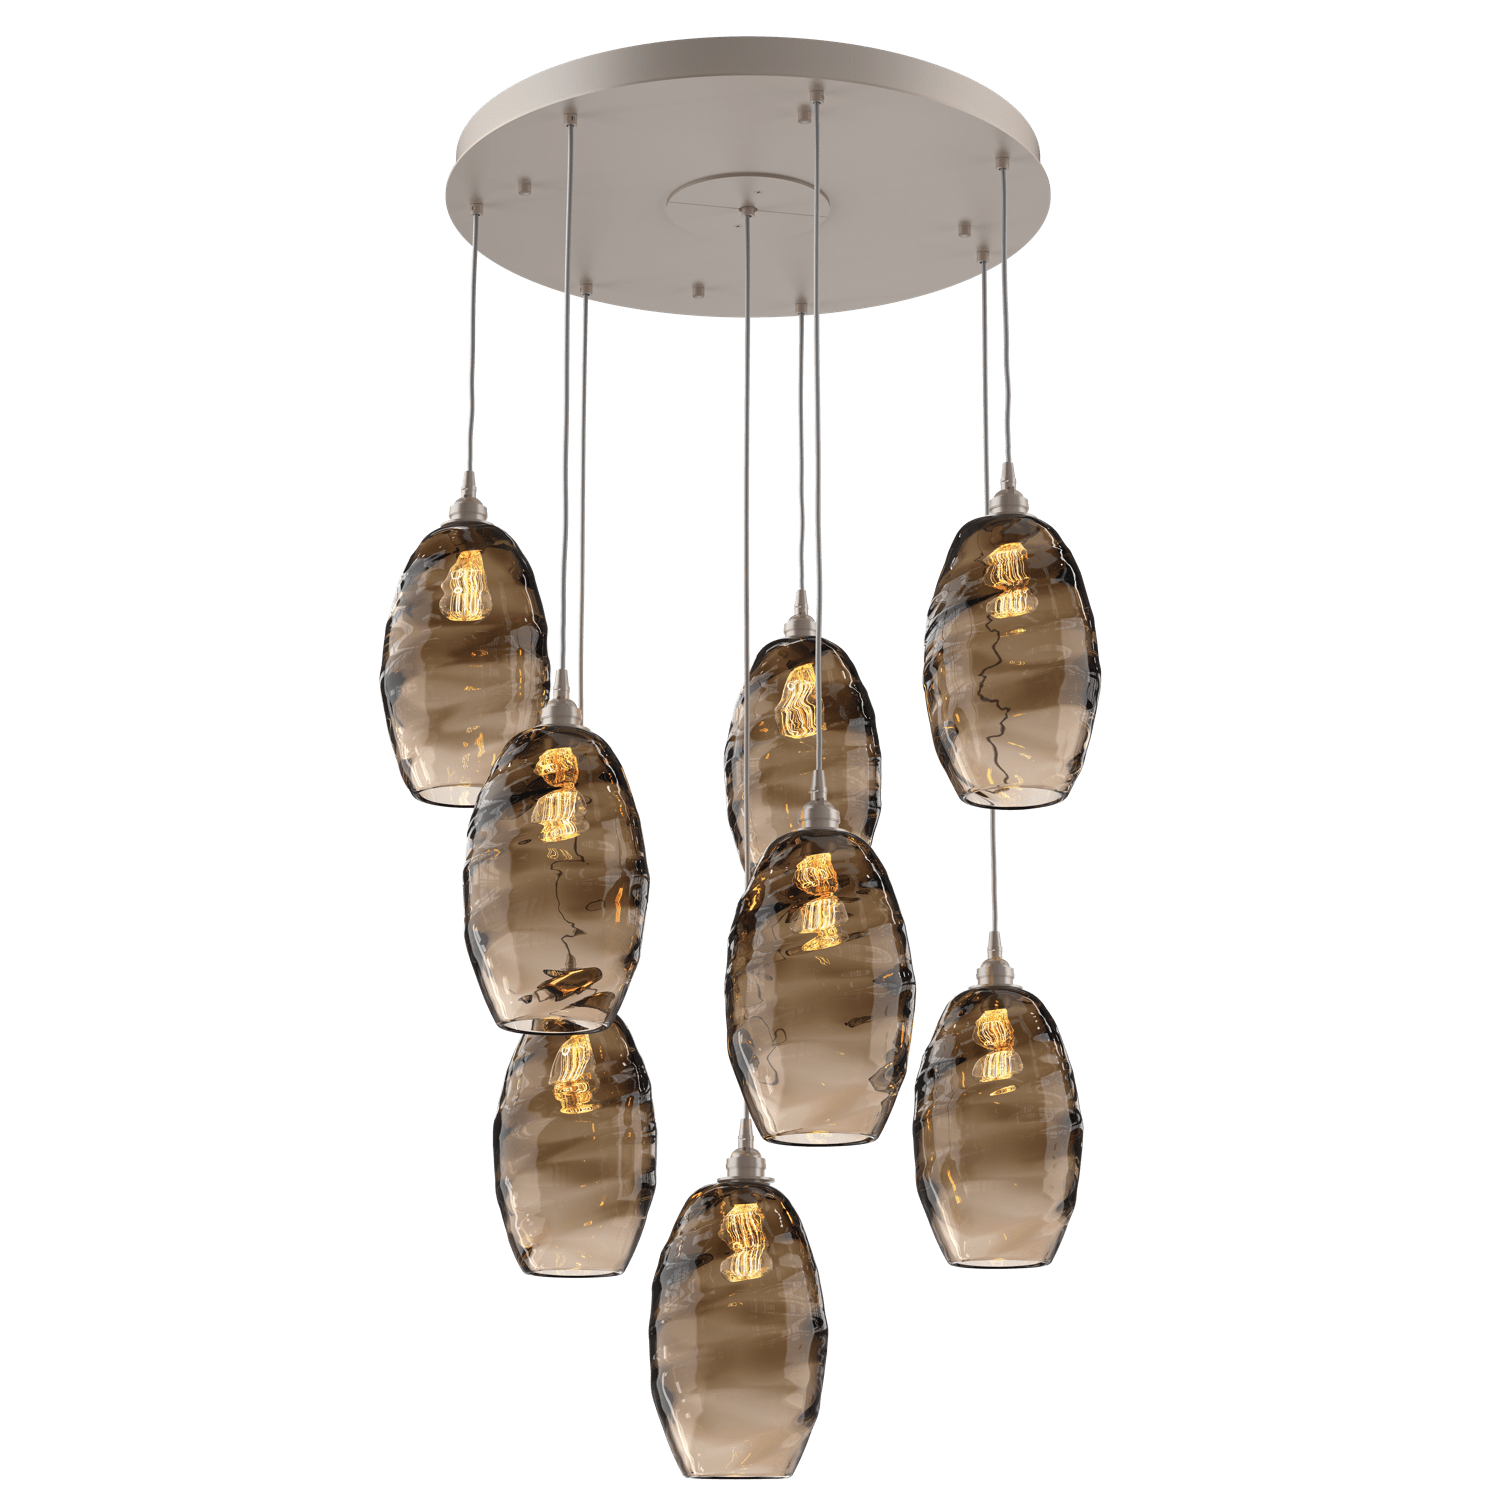 CHB0035-08-BS-OB-Hammerton-Studio-Optic-Blown-Glass-Elisse-8-light-round-pendant-chandelier-with-metallic-beige-silver-finish-and-optic-bronze-blown-glass-shades-and-incandescent-lamping